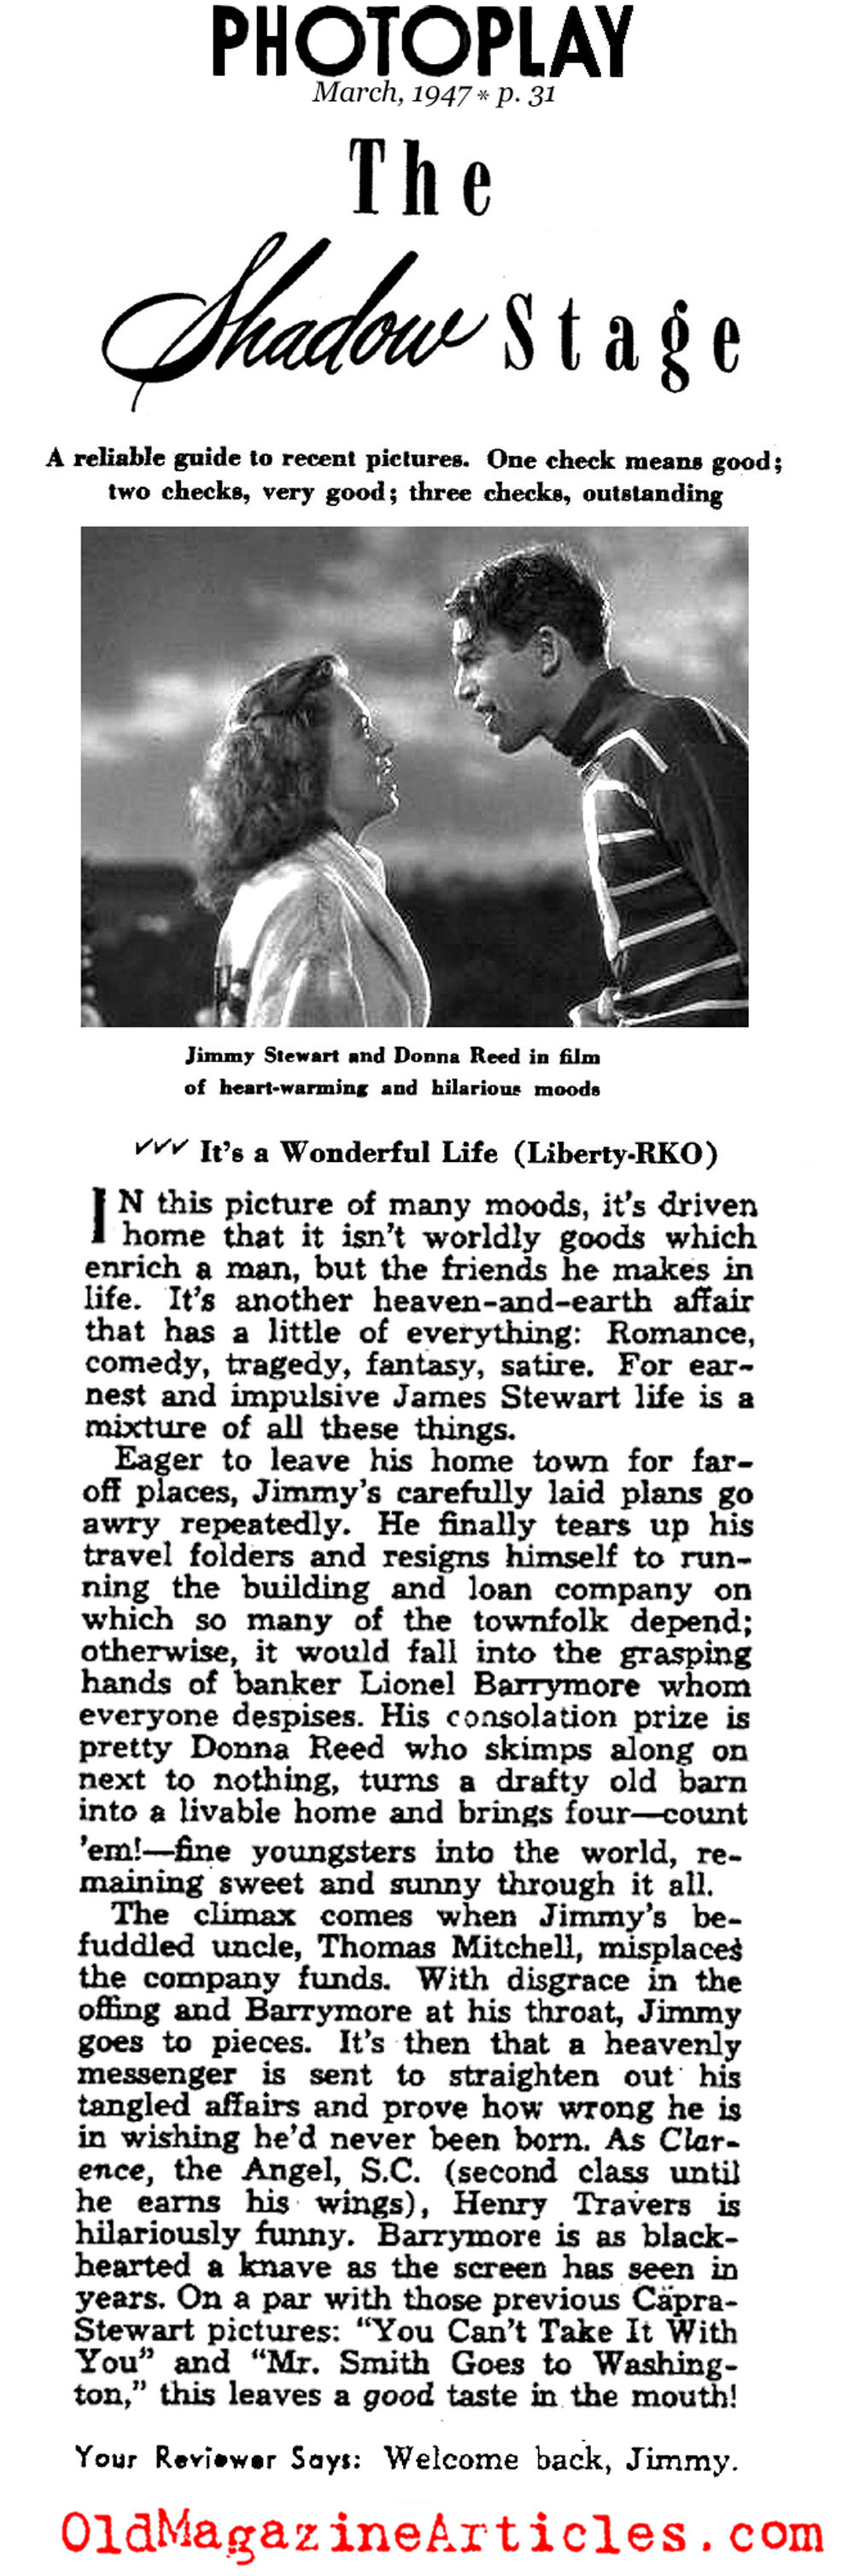 'It's a Wonderful Life' - the Synopsis (Photoplay Magazine, 1947)